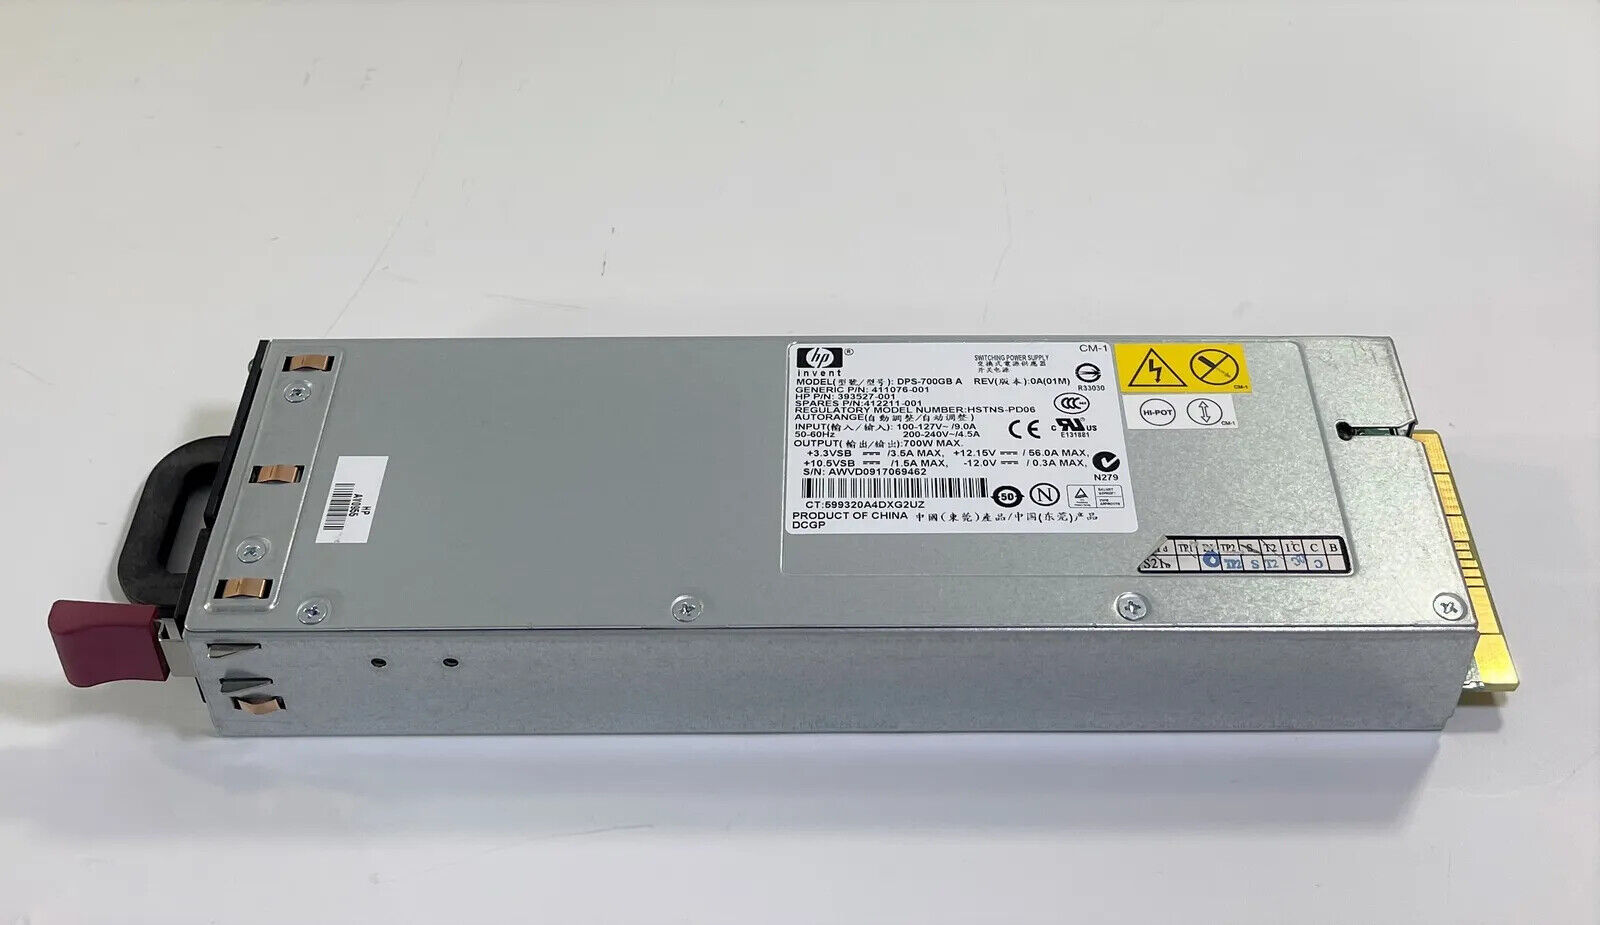 HP DPS-700GB A 393527-001 700W Server Power Supply for HP ProLiant ML370 G5